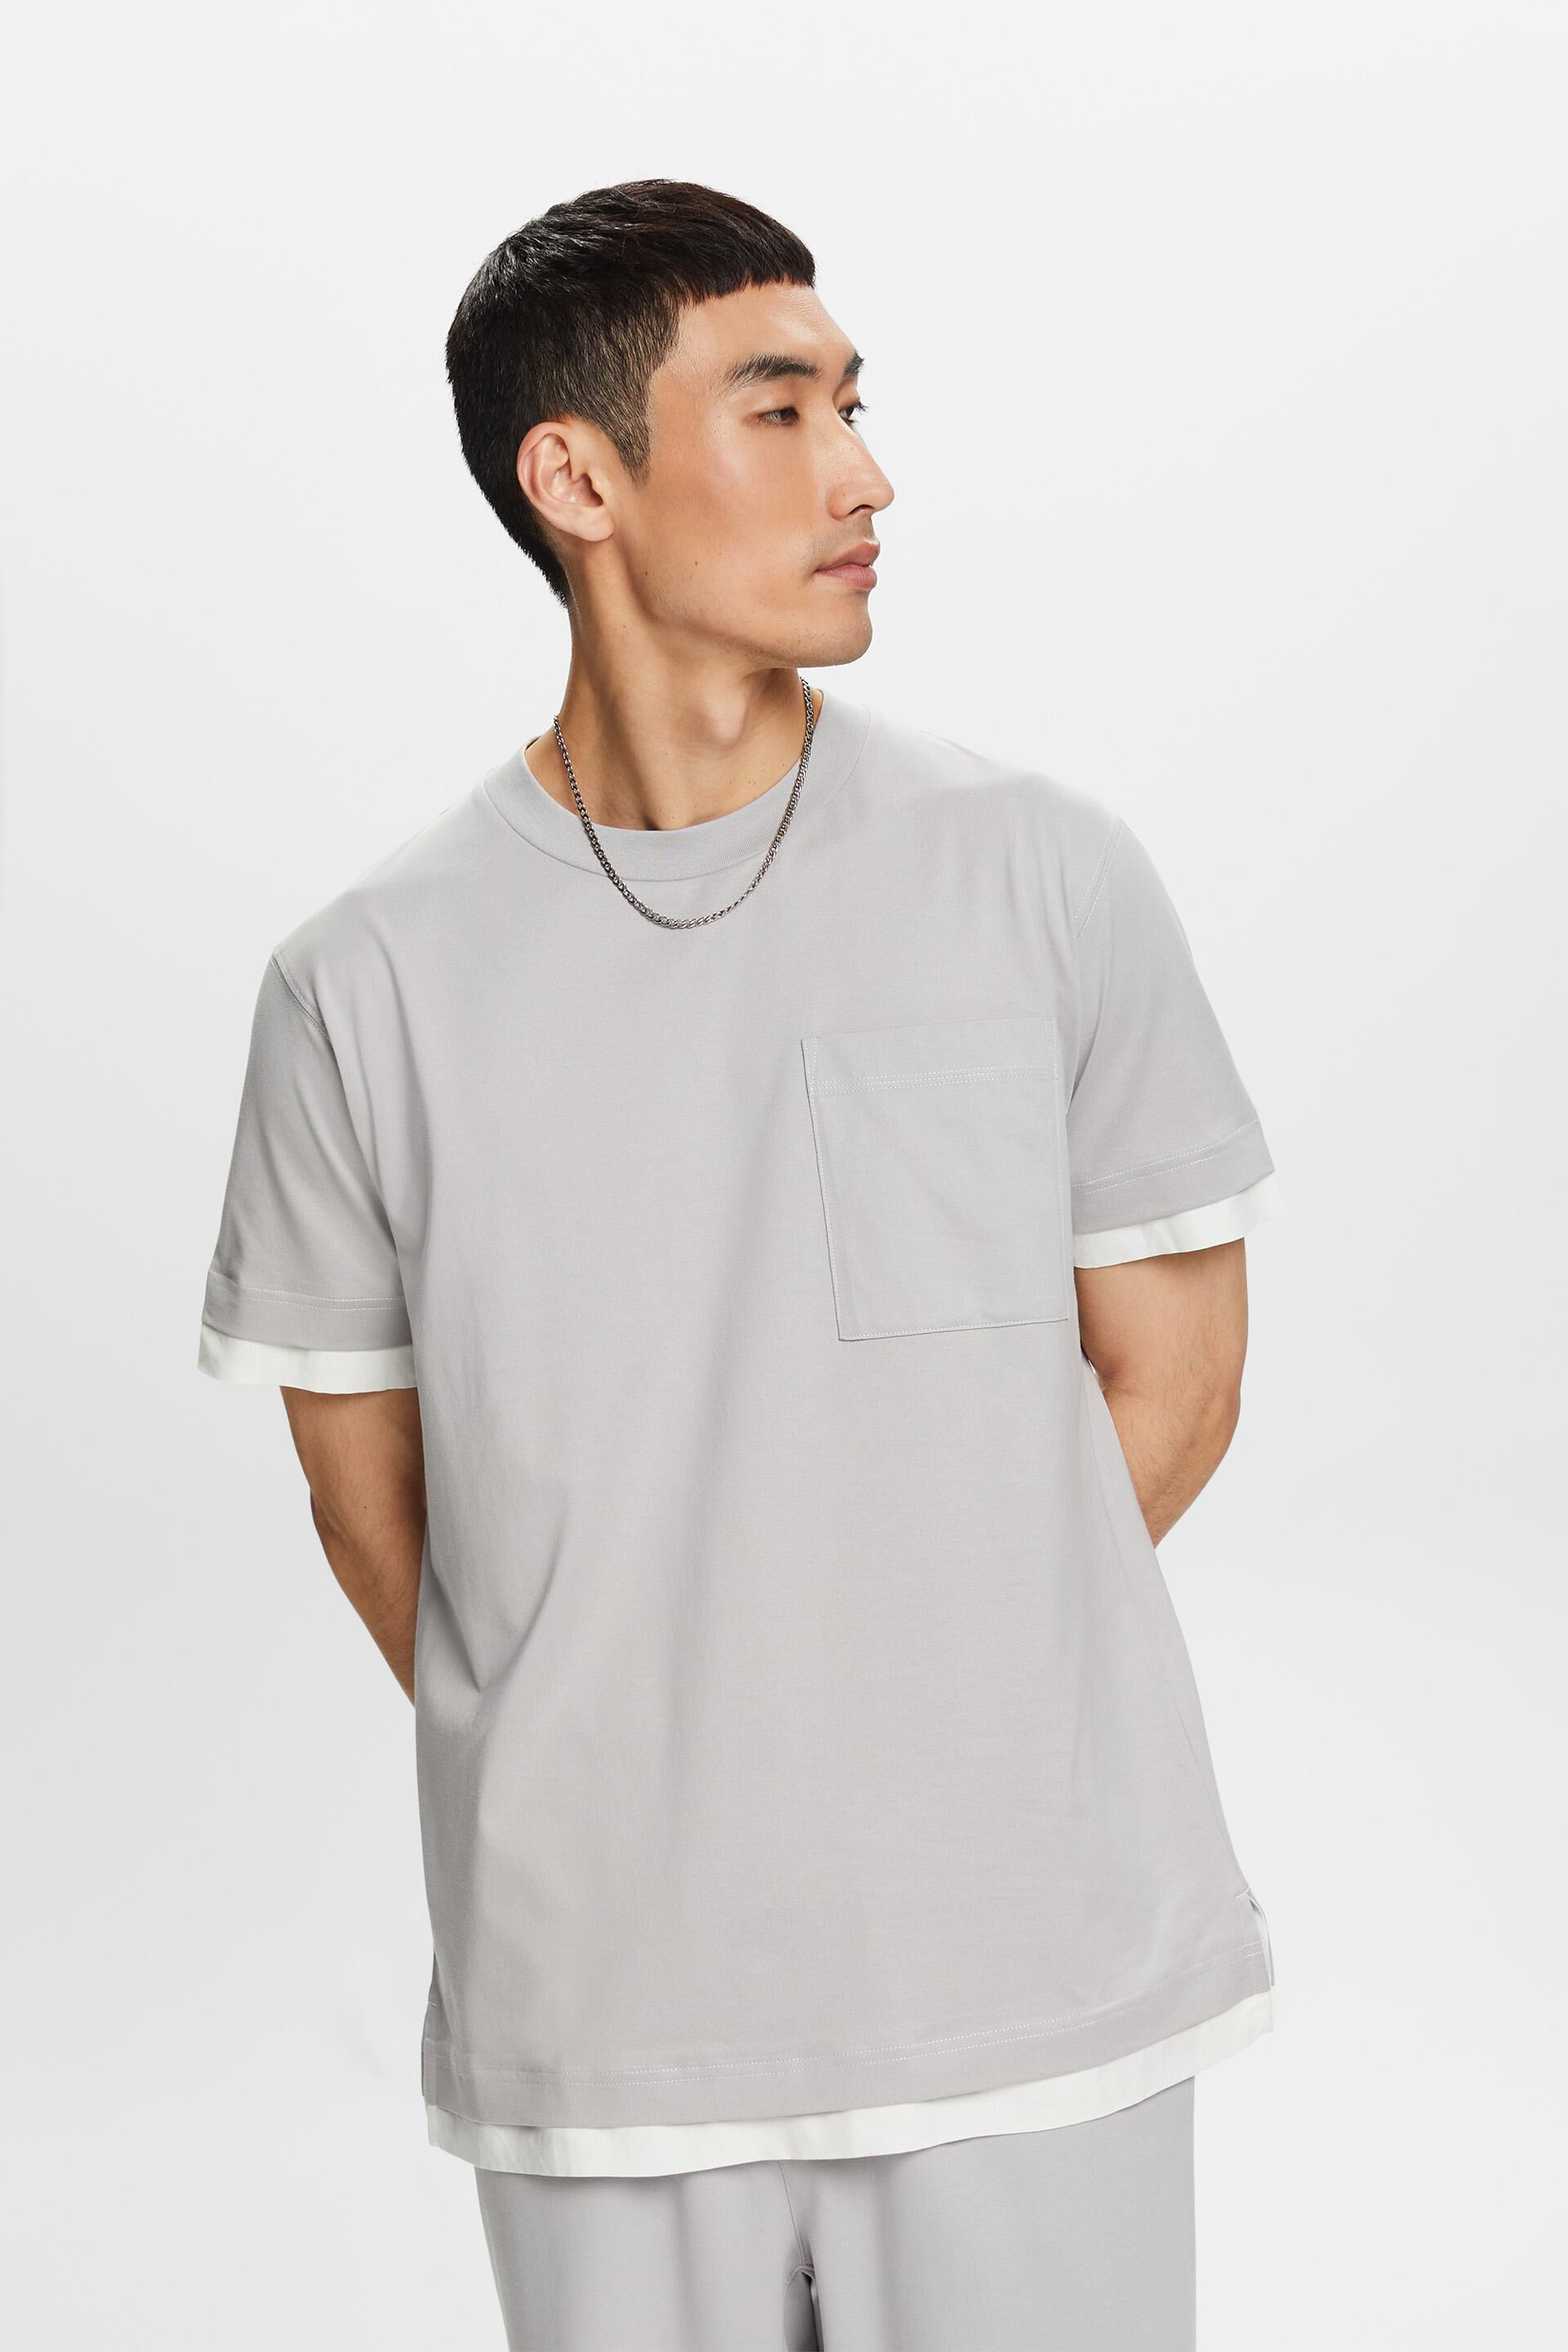 ESPRIT - Crewneck t-shirt in a layered look, 100% cotton at our